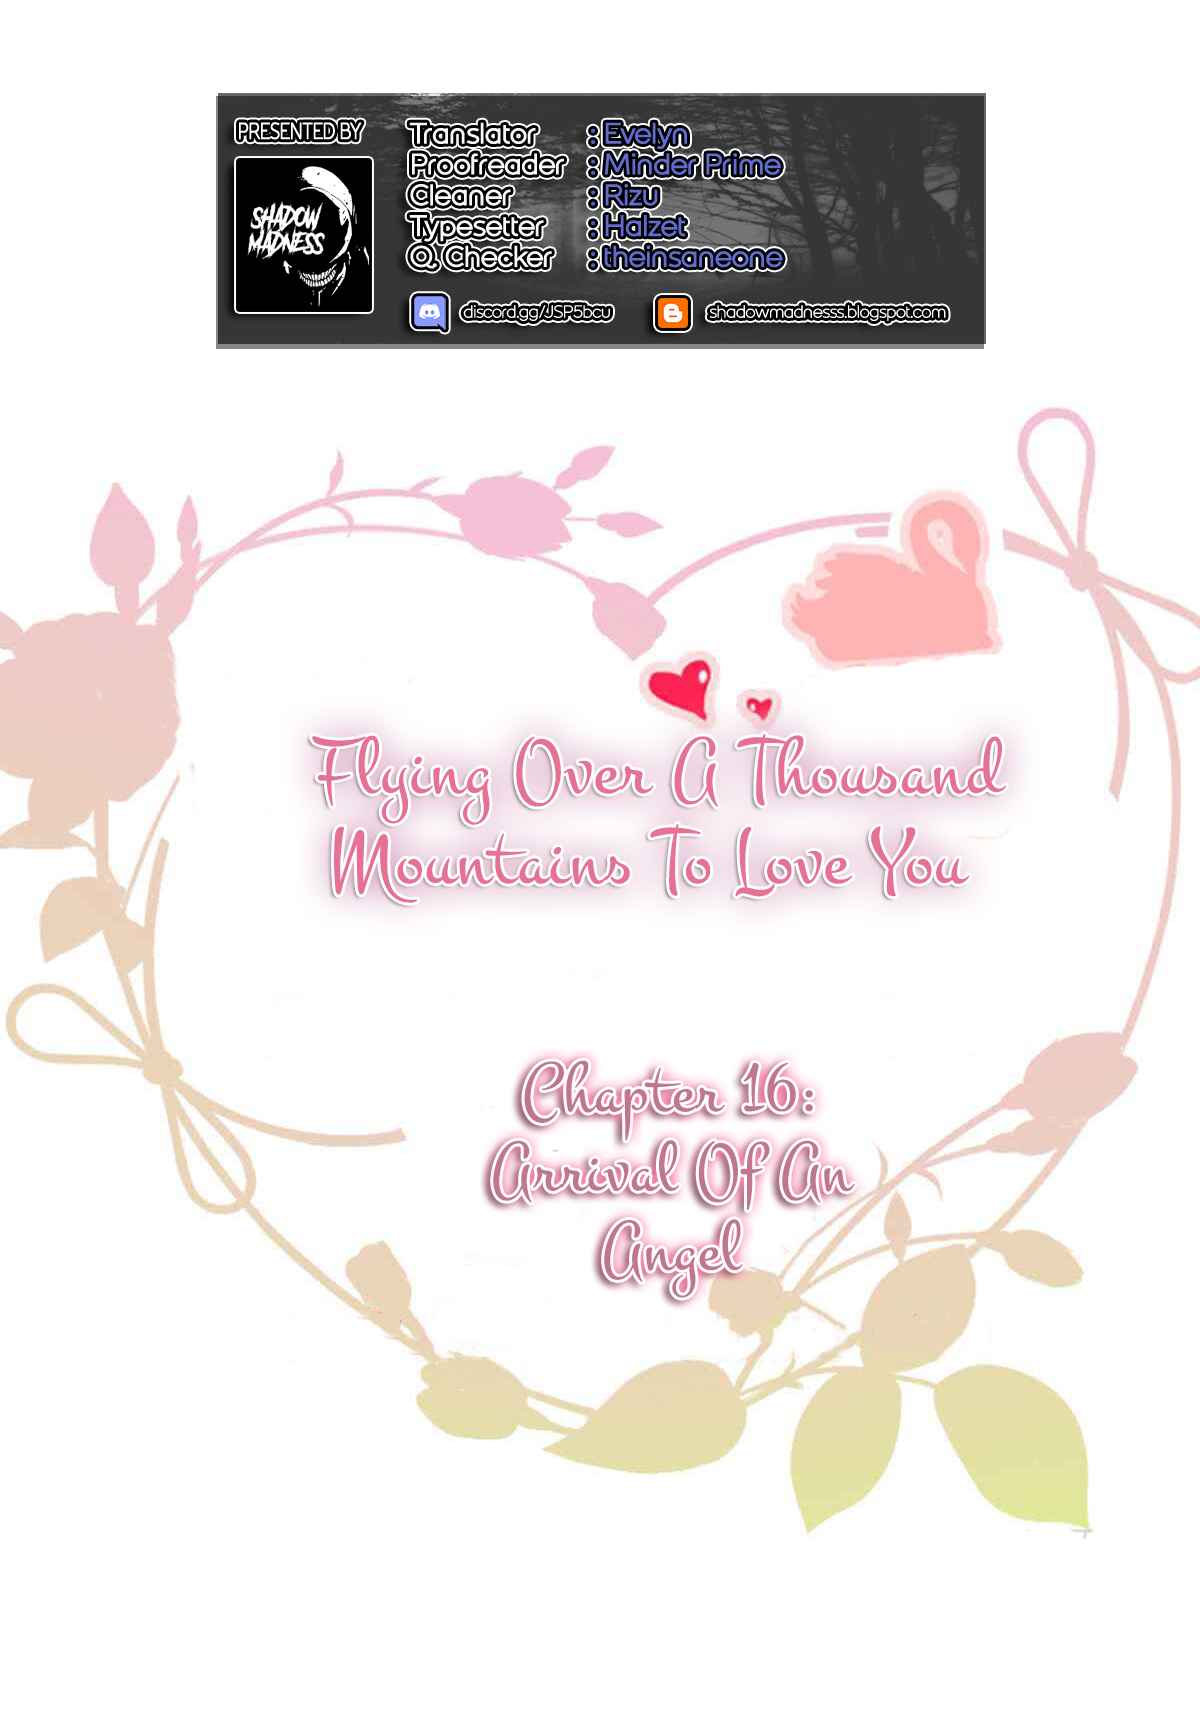 Flying Over a Thousand Mountains to Love You Ch. 16 Arrival Of An Angel